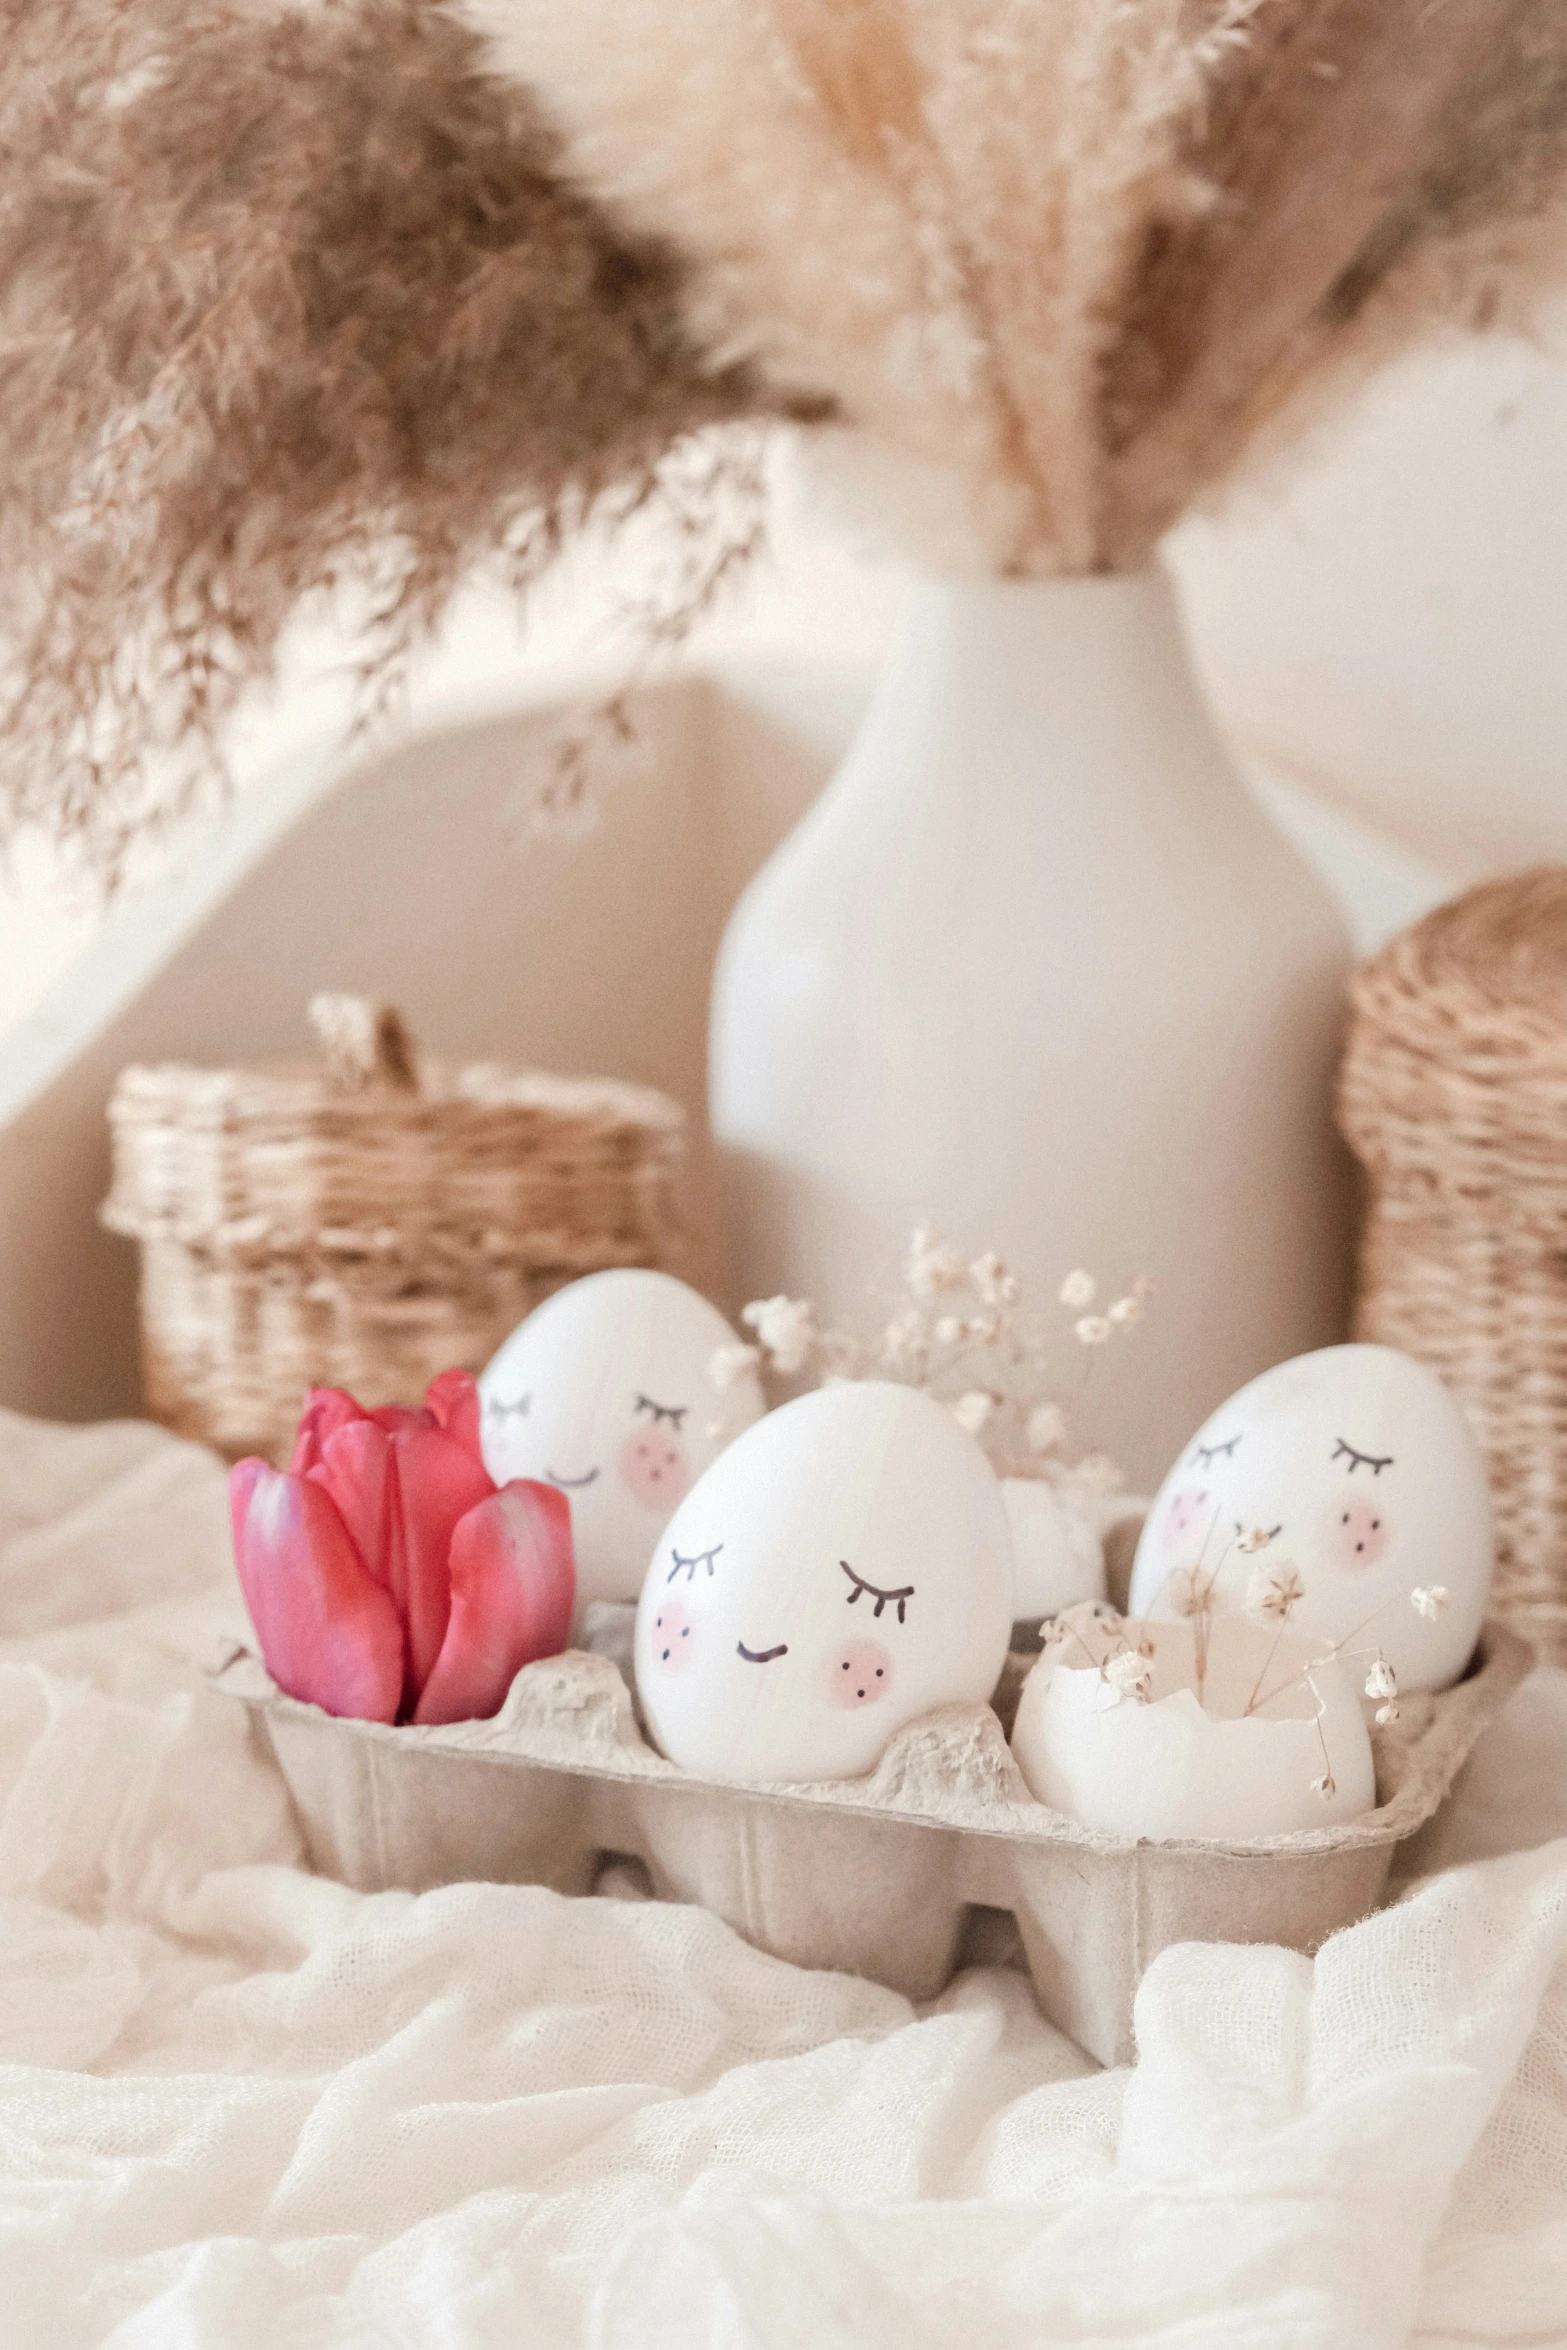 eggs in basket with flowers on the side, white vase behind